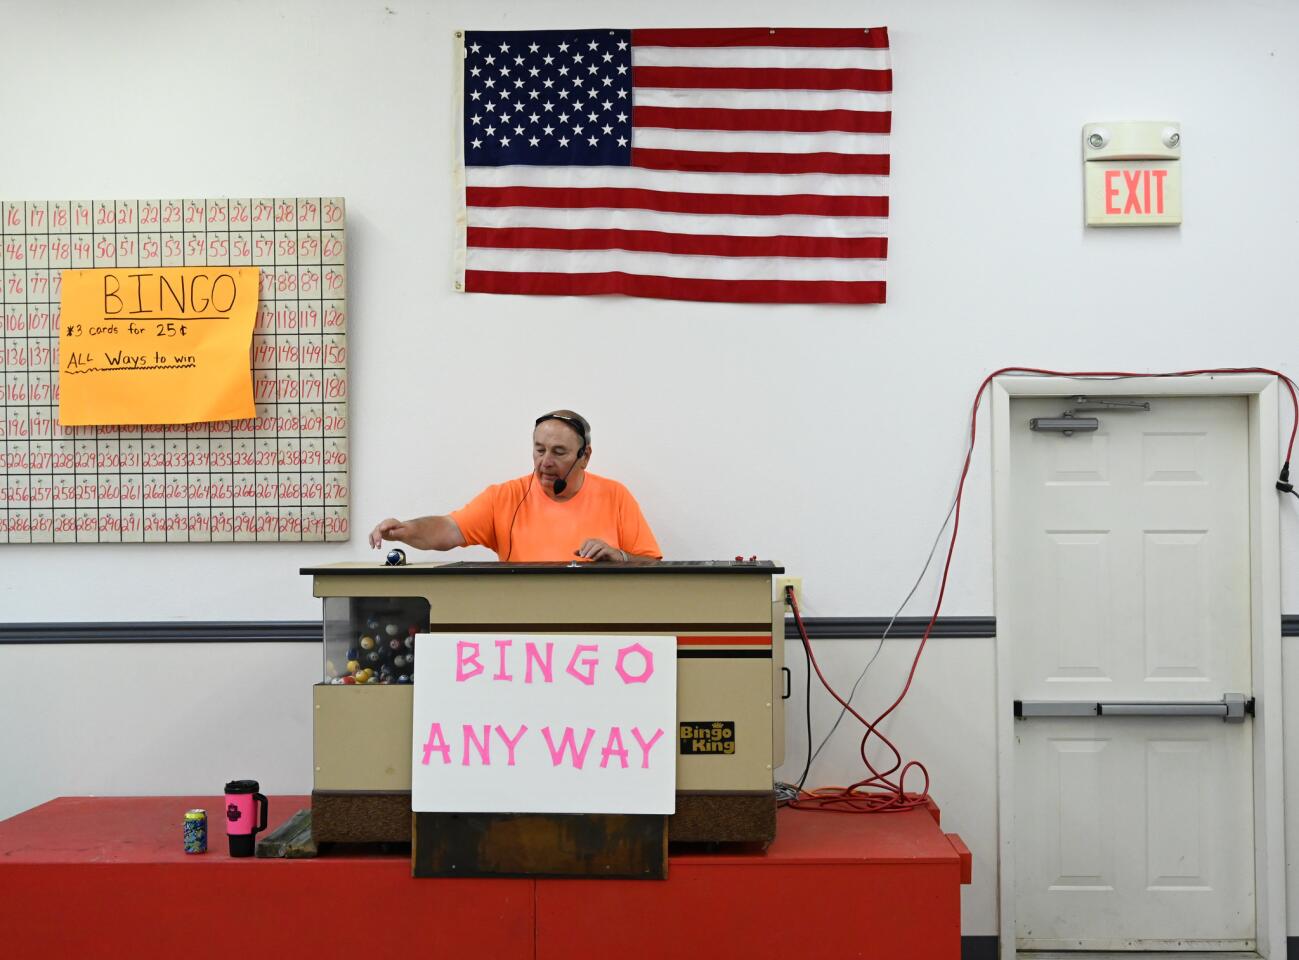 Donnie Koontz with the Harney Lions Club calls a bingo game in the hall during the carnival at the Harney Volunteer Fire Company on Tuesday, June 25.